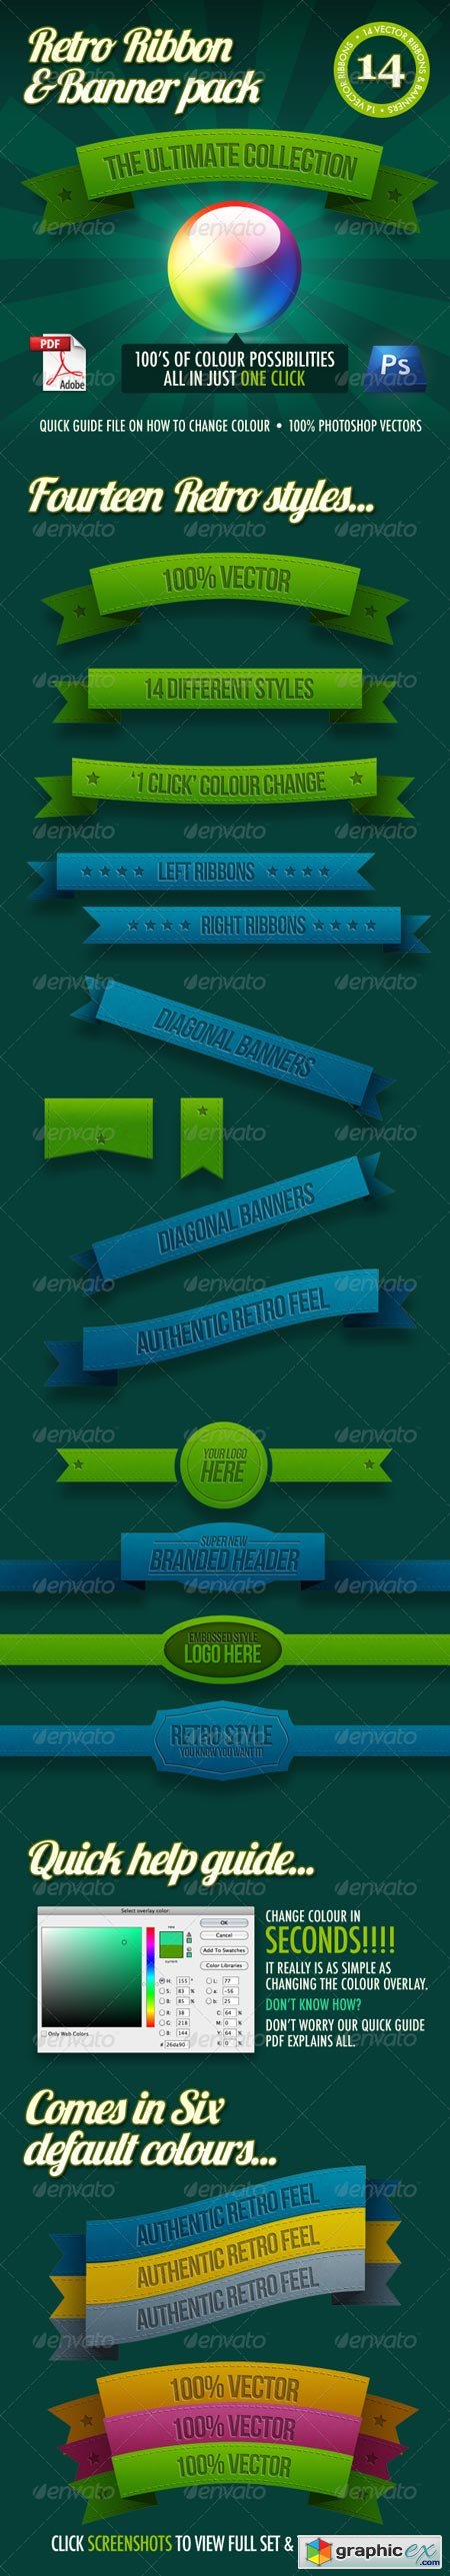 14 Retro Ribbons & Banners 400734